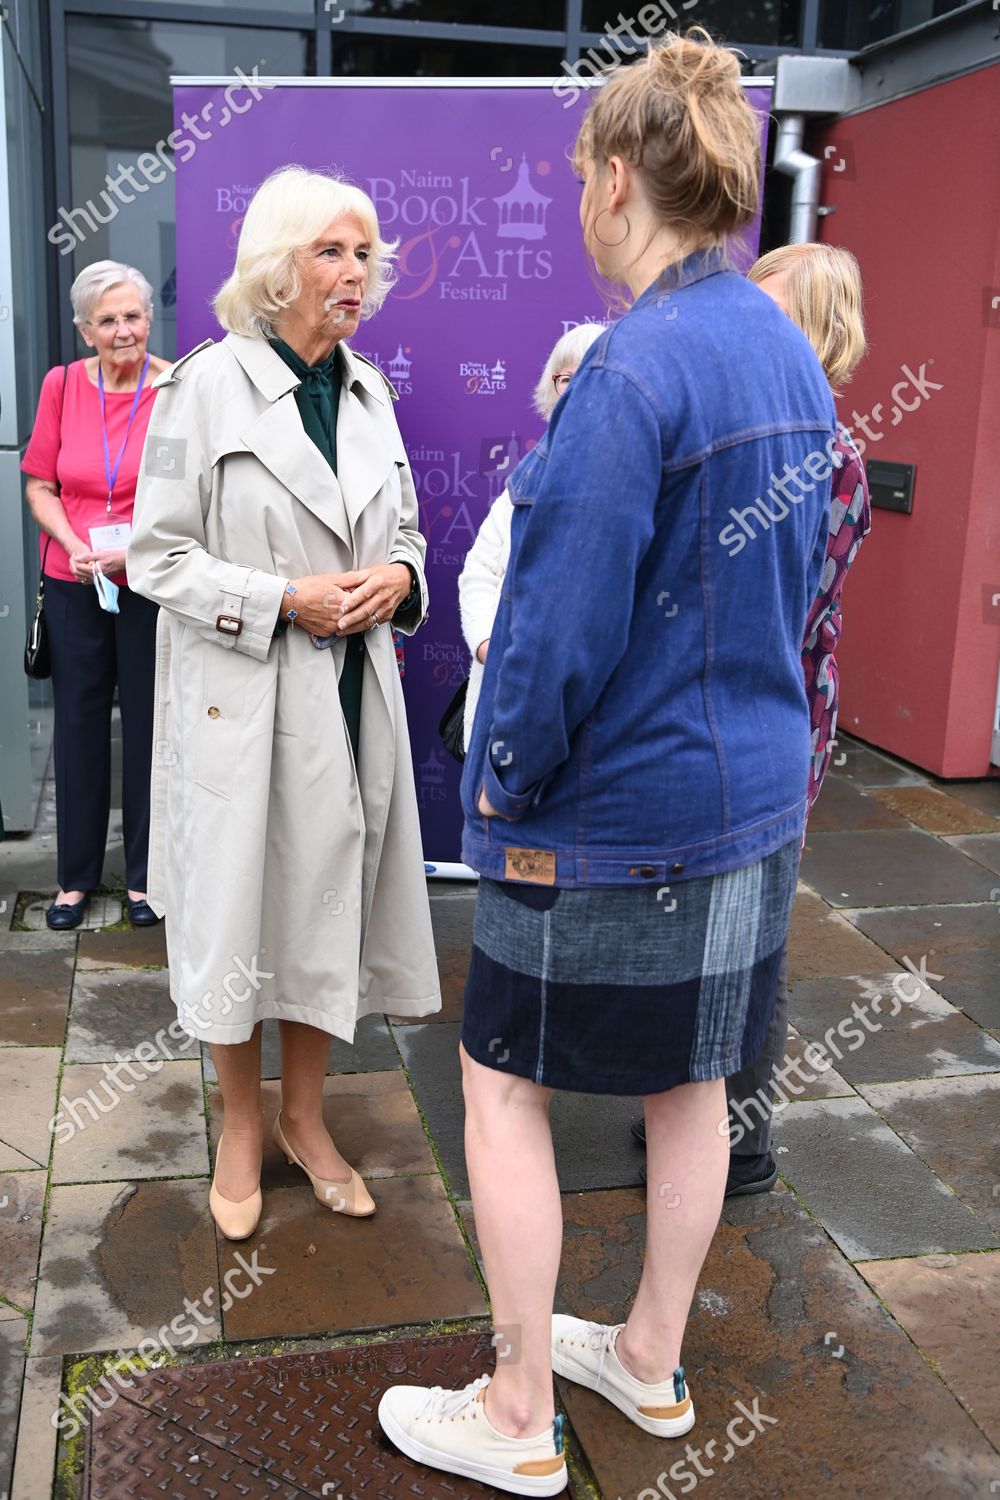 the-duchess-of-rothesay-visit-to-nairn-book-and-arts-festival-and-environment-charity-green-hive-nairn-community-centre-scotland-uk-shutterstock-editorial-12437607f.jpg